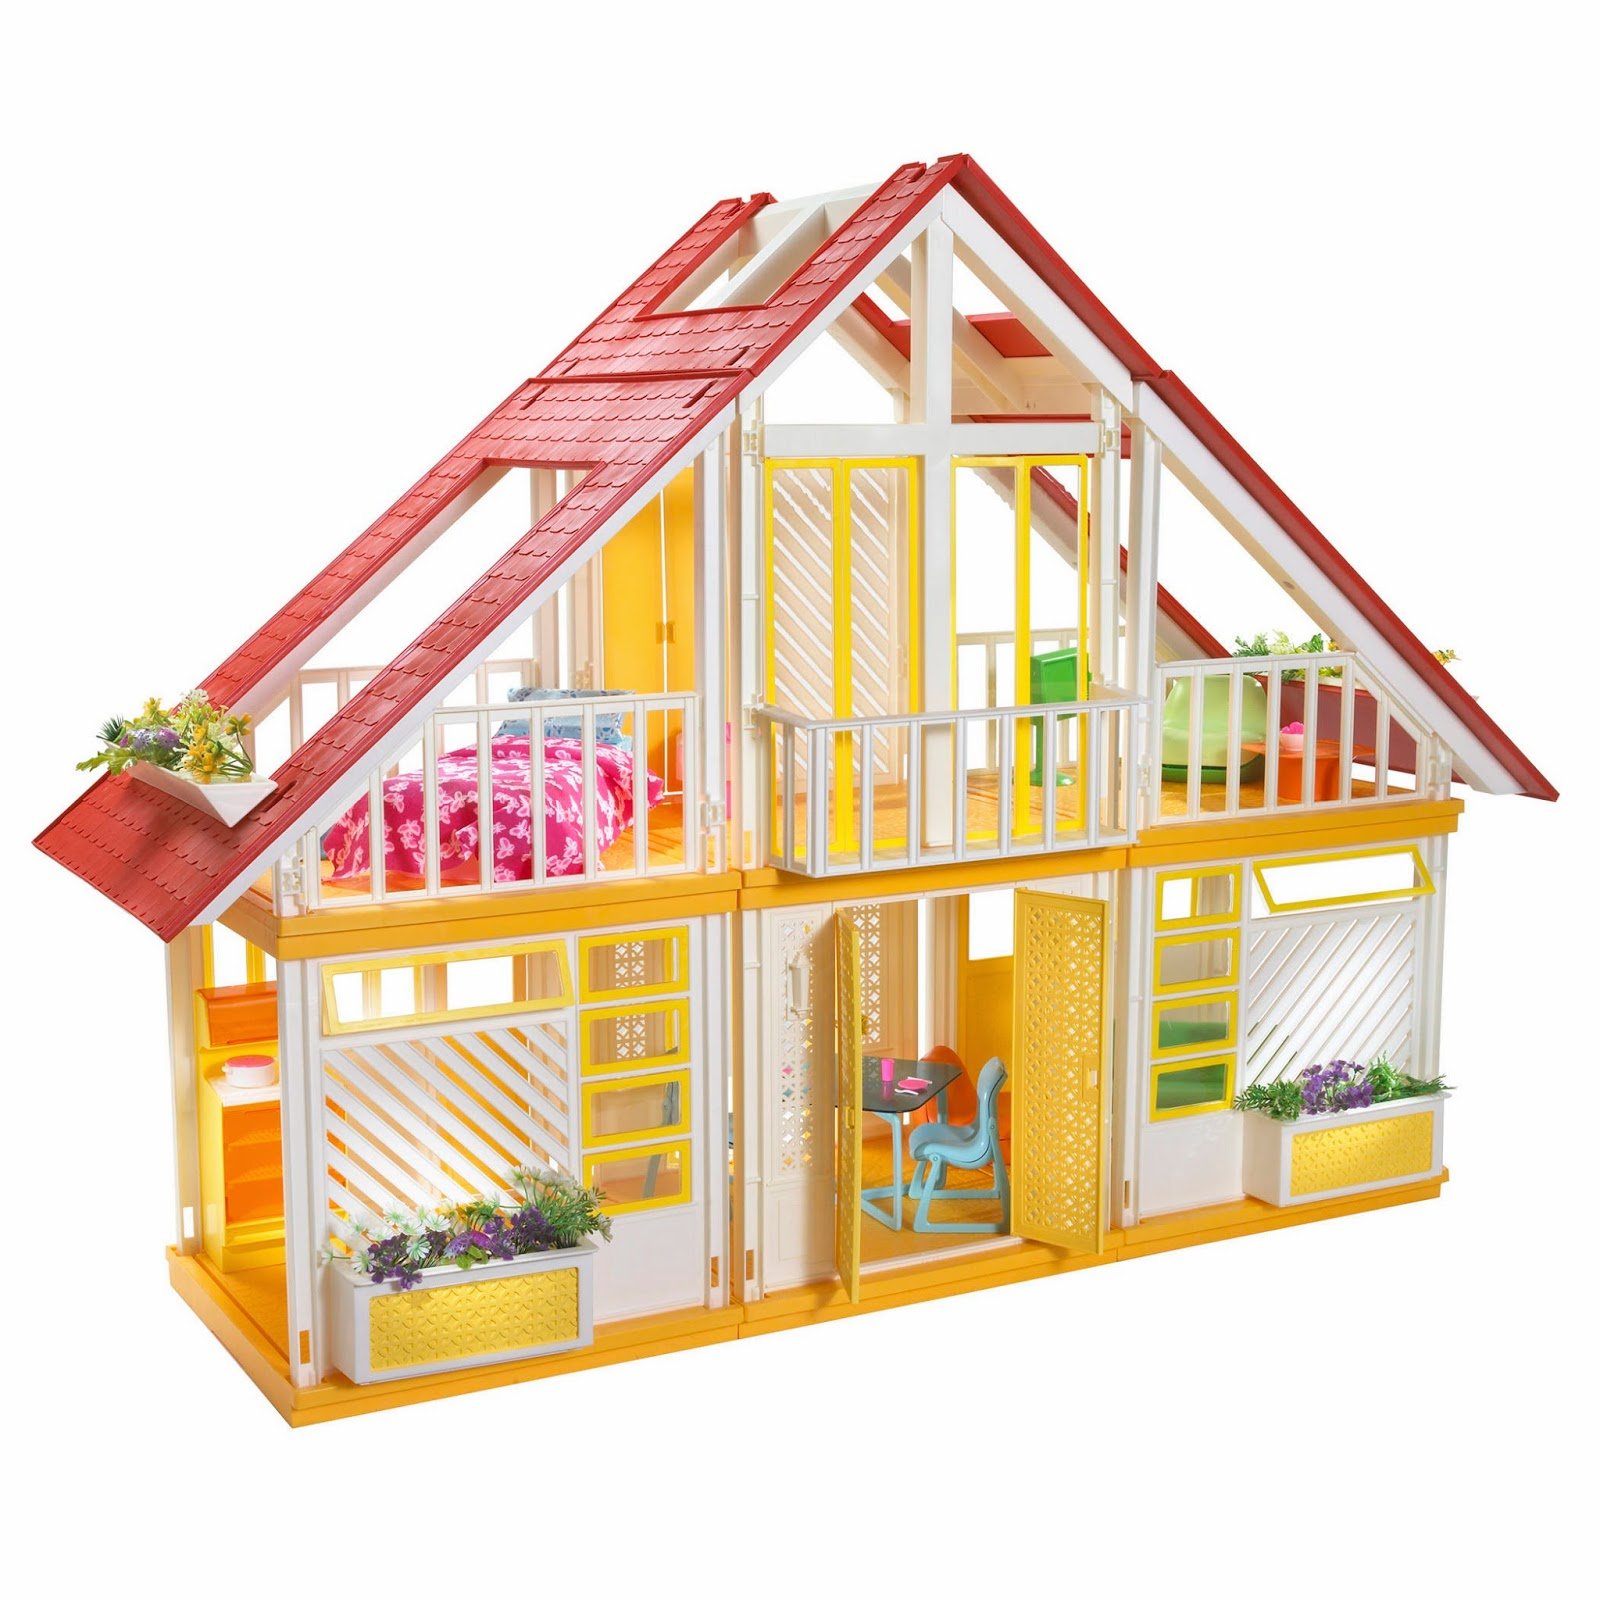 Barbie Dream House Pictures Widescreen HD Wallpapers